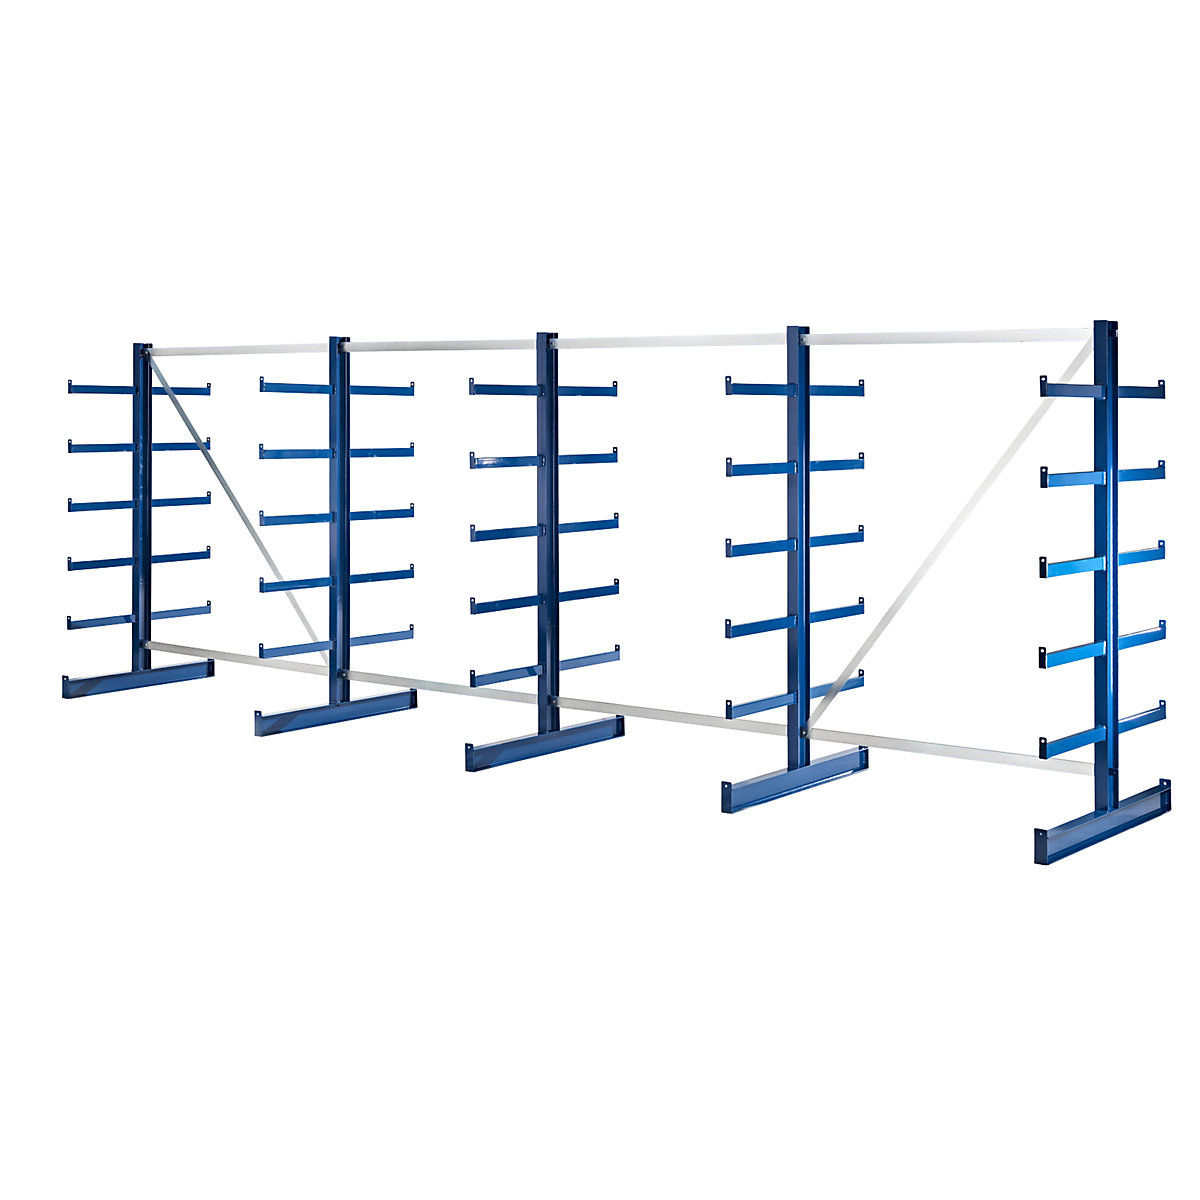 Cantilever racking unit with identical cantilever arm length – eurokraft pro, shelf unit length 5400 mm, double sided, gentian blue-3